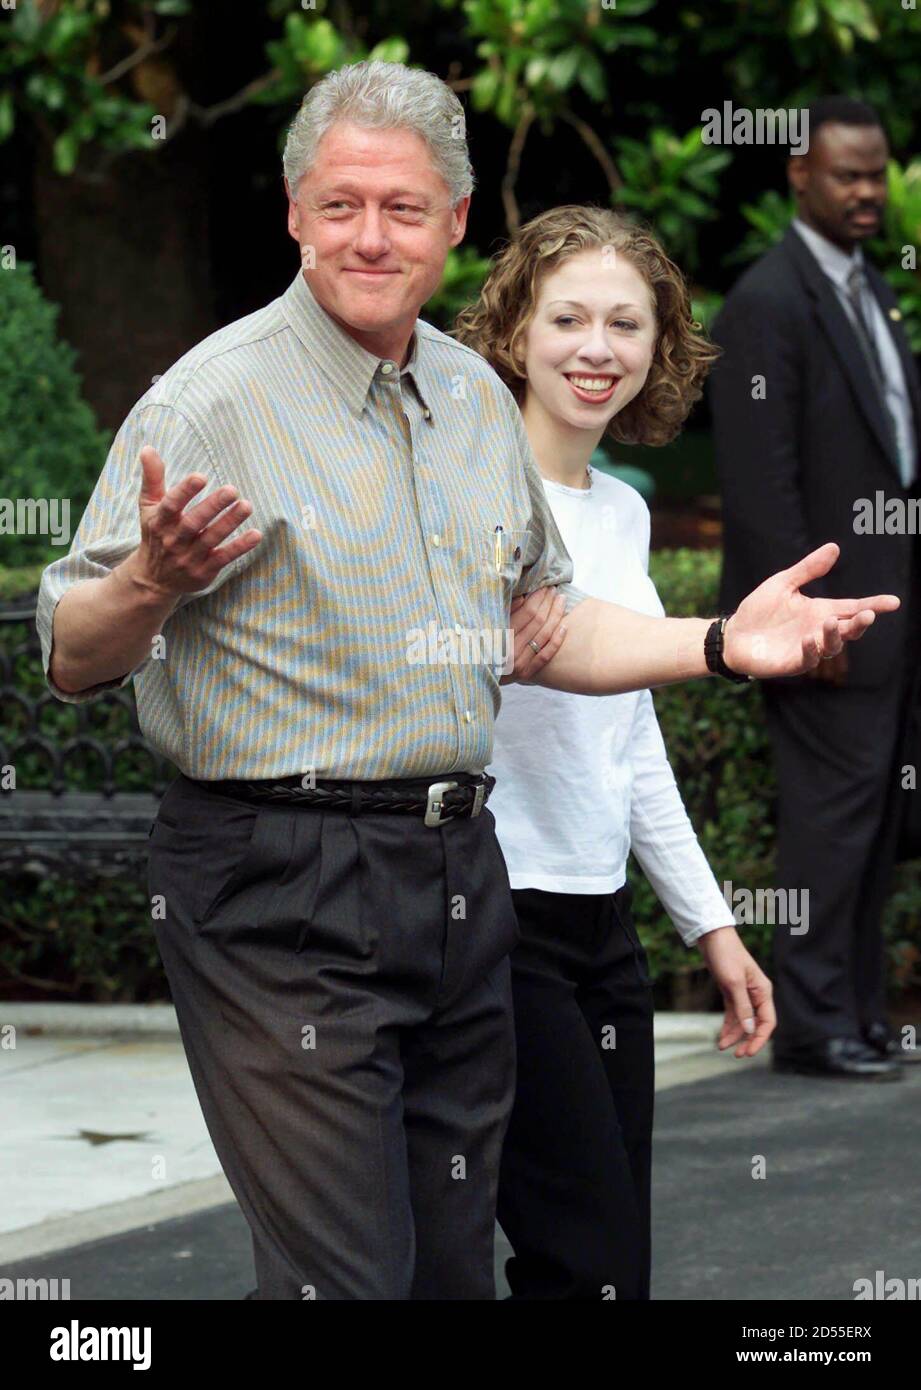 U.S. President Bill Clinton (L) shrugs in answer to the certianty of peace  in the Middle East as he leaves for Camp David with his daughter Chelsea  (R) from the White House